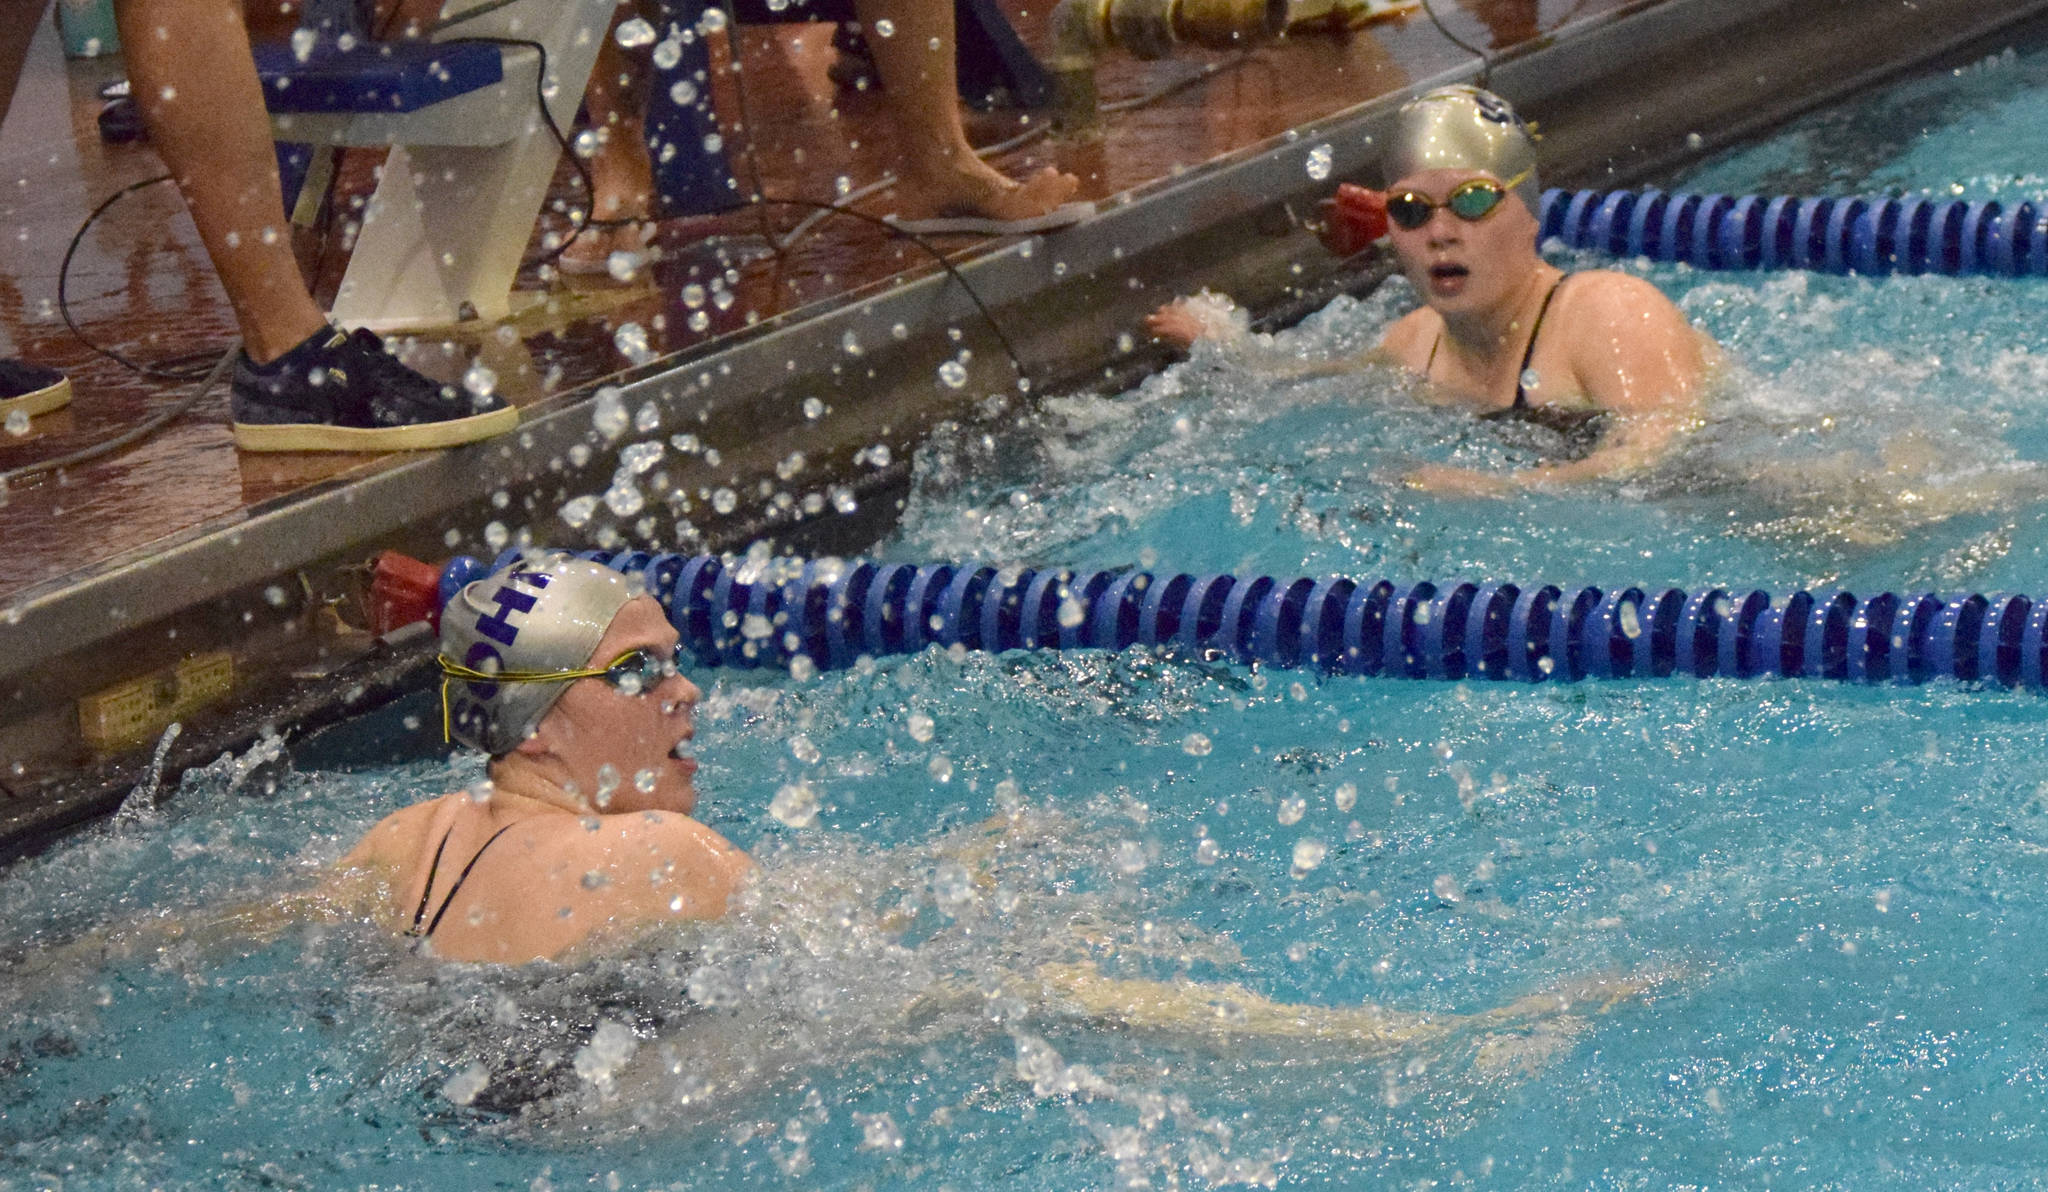 Soldotna High School’s Madison Snyder and Katie Creglow touch the wall in the 50-yard freestyle Friday, Sept. 20, 2019, in the 2019 SoHi Pentathlon at Soldotna High School in Soldotna, Alaska. (Photo by Jeff Helminiak/Peninsula Clarion)